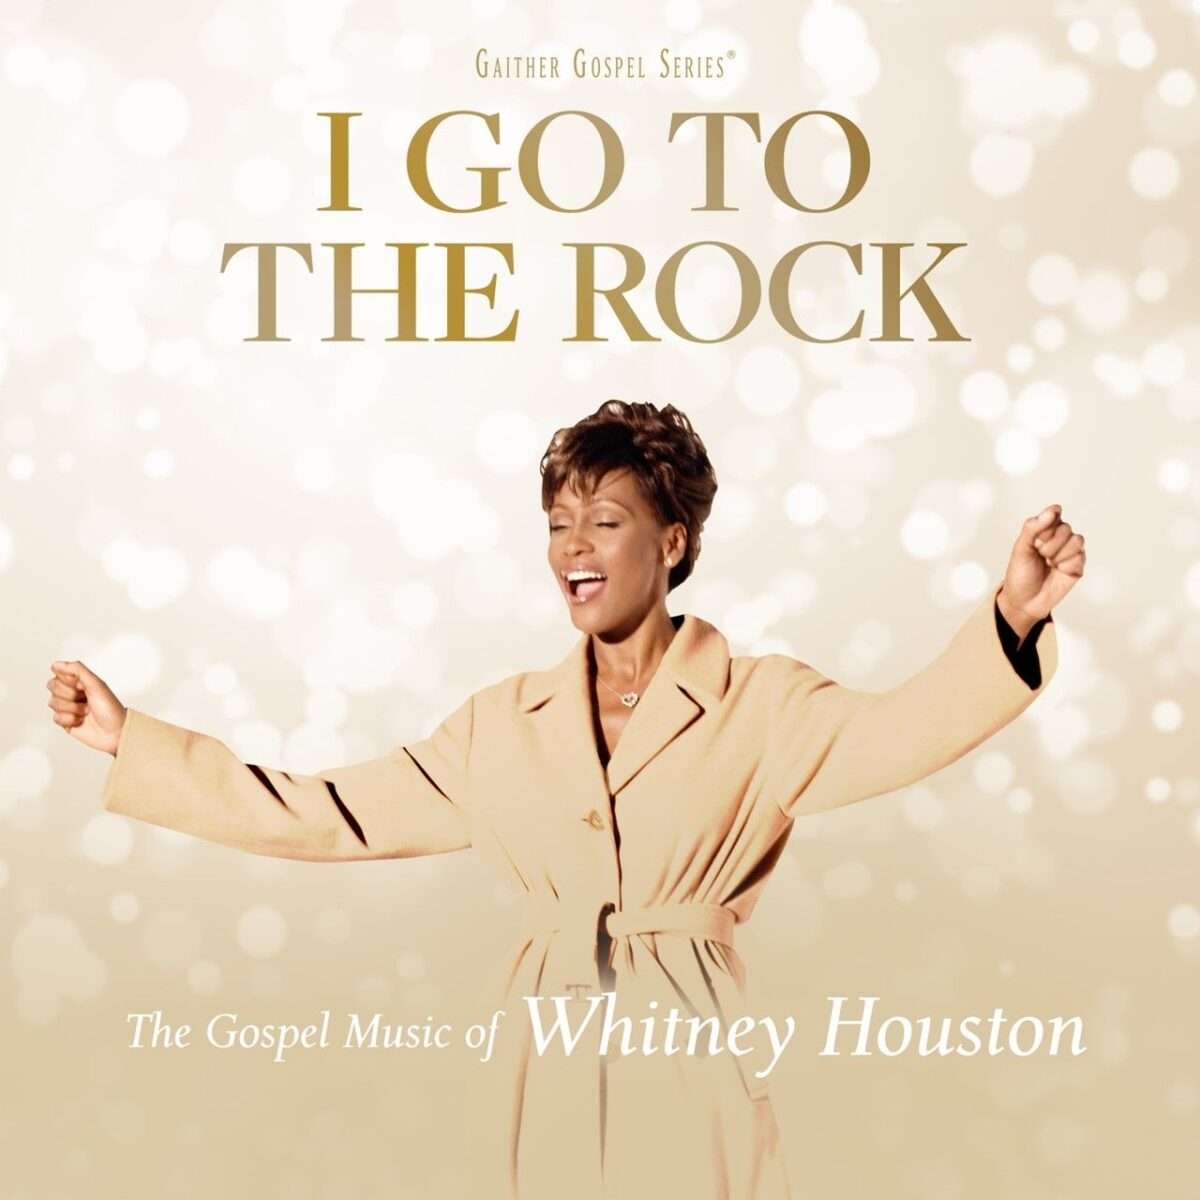 i-go-to-the-rock:-the-gospel-music-of-whitney-houston-soars-to-top-of-the-charts,-lyric-video-available